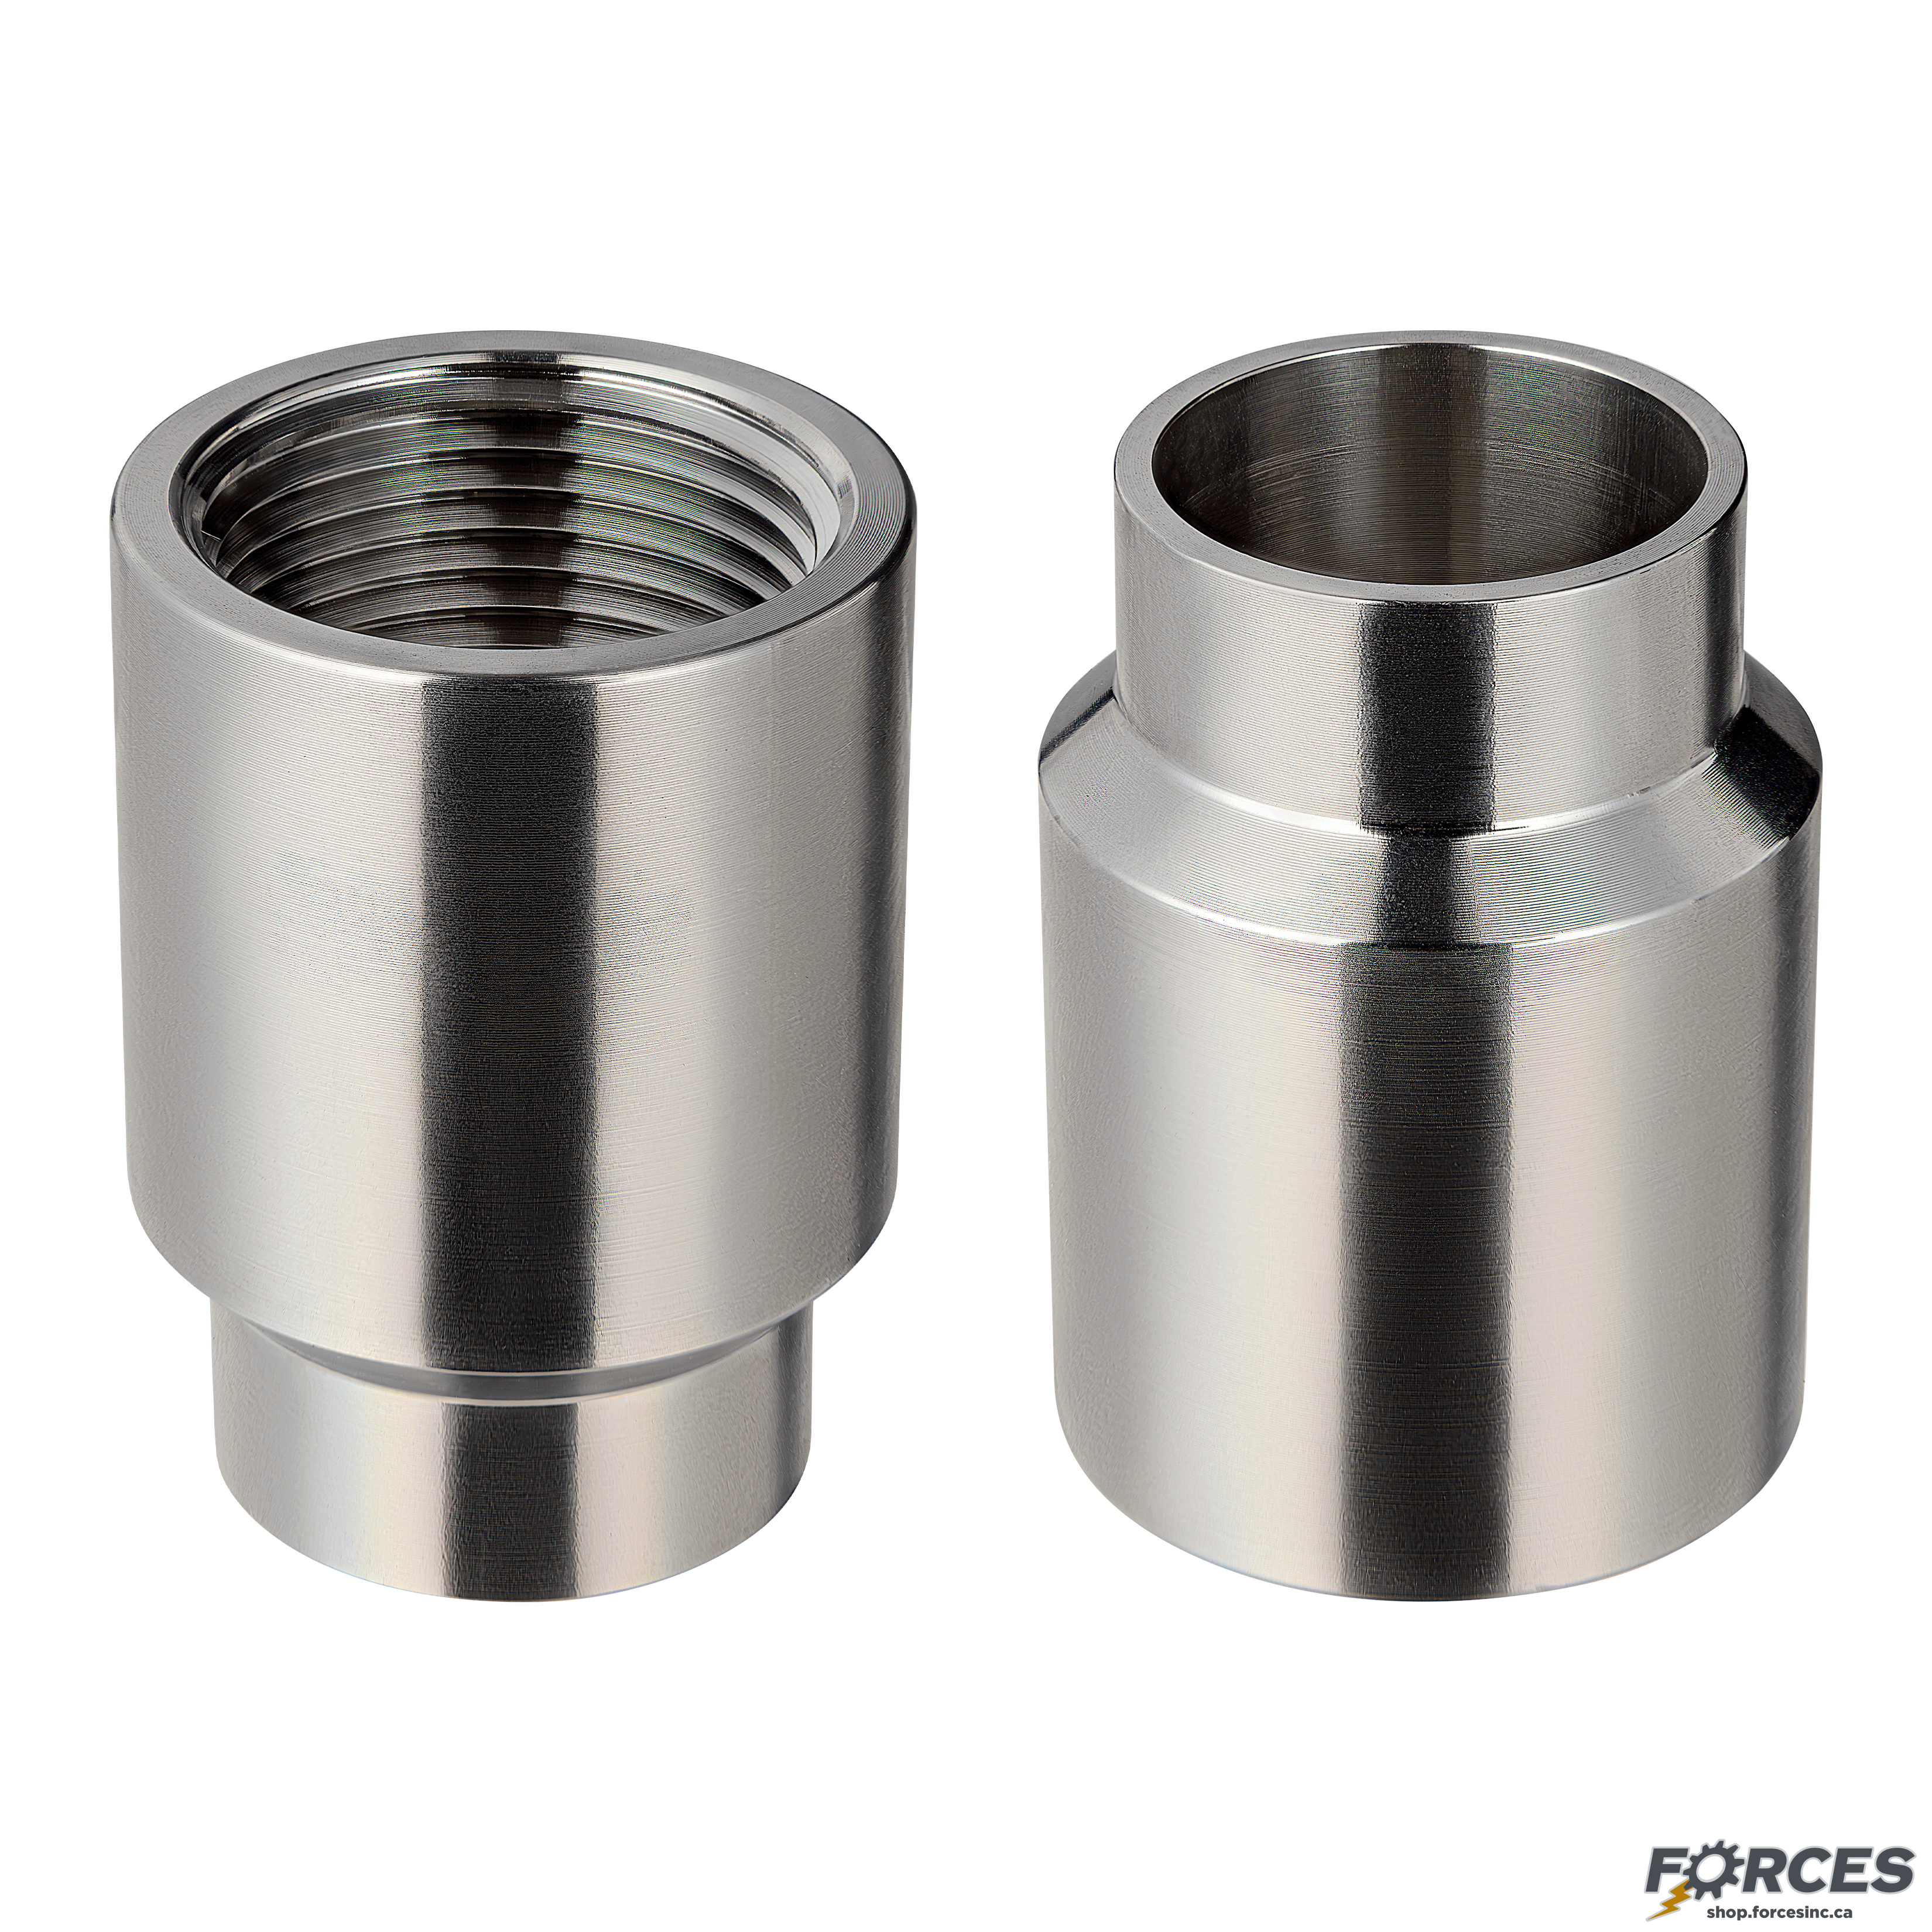 2" x 2" Butt Weld x Female NPT Adapter - Stainless Steel 316 - Forces Inc